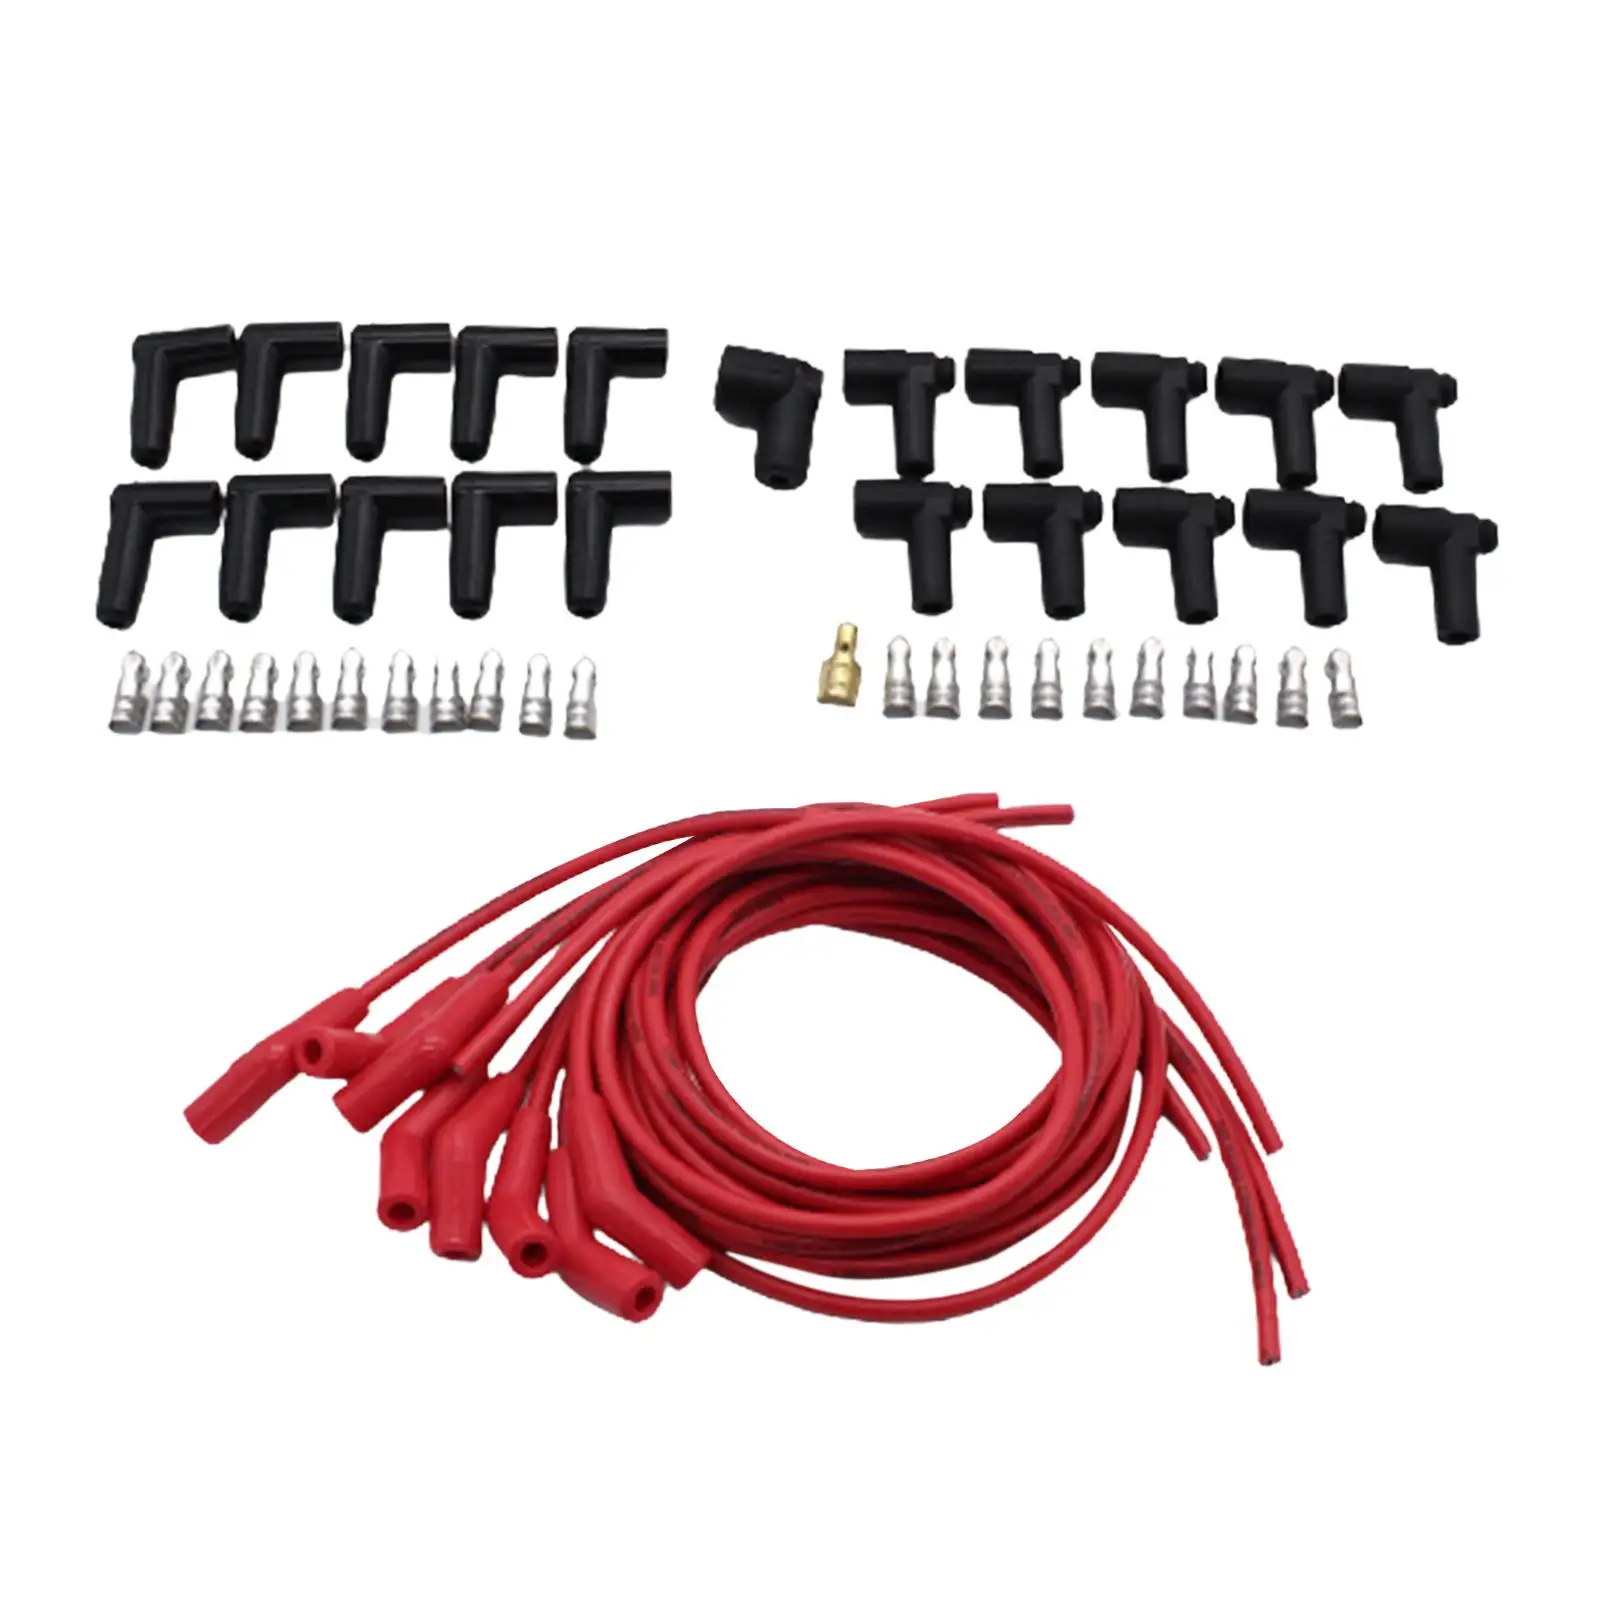 Spark Plug Wire Set Spare Parts Car Accessories Replaces Premium High Performance Red with 45/135 Spark Plug Boot for Mopar